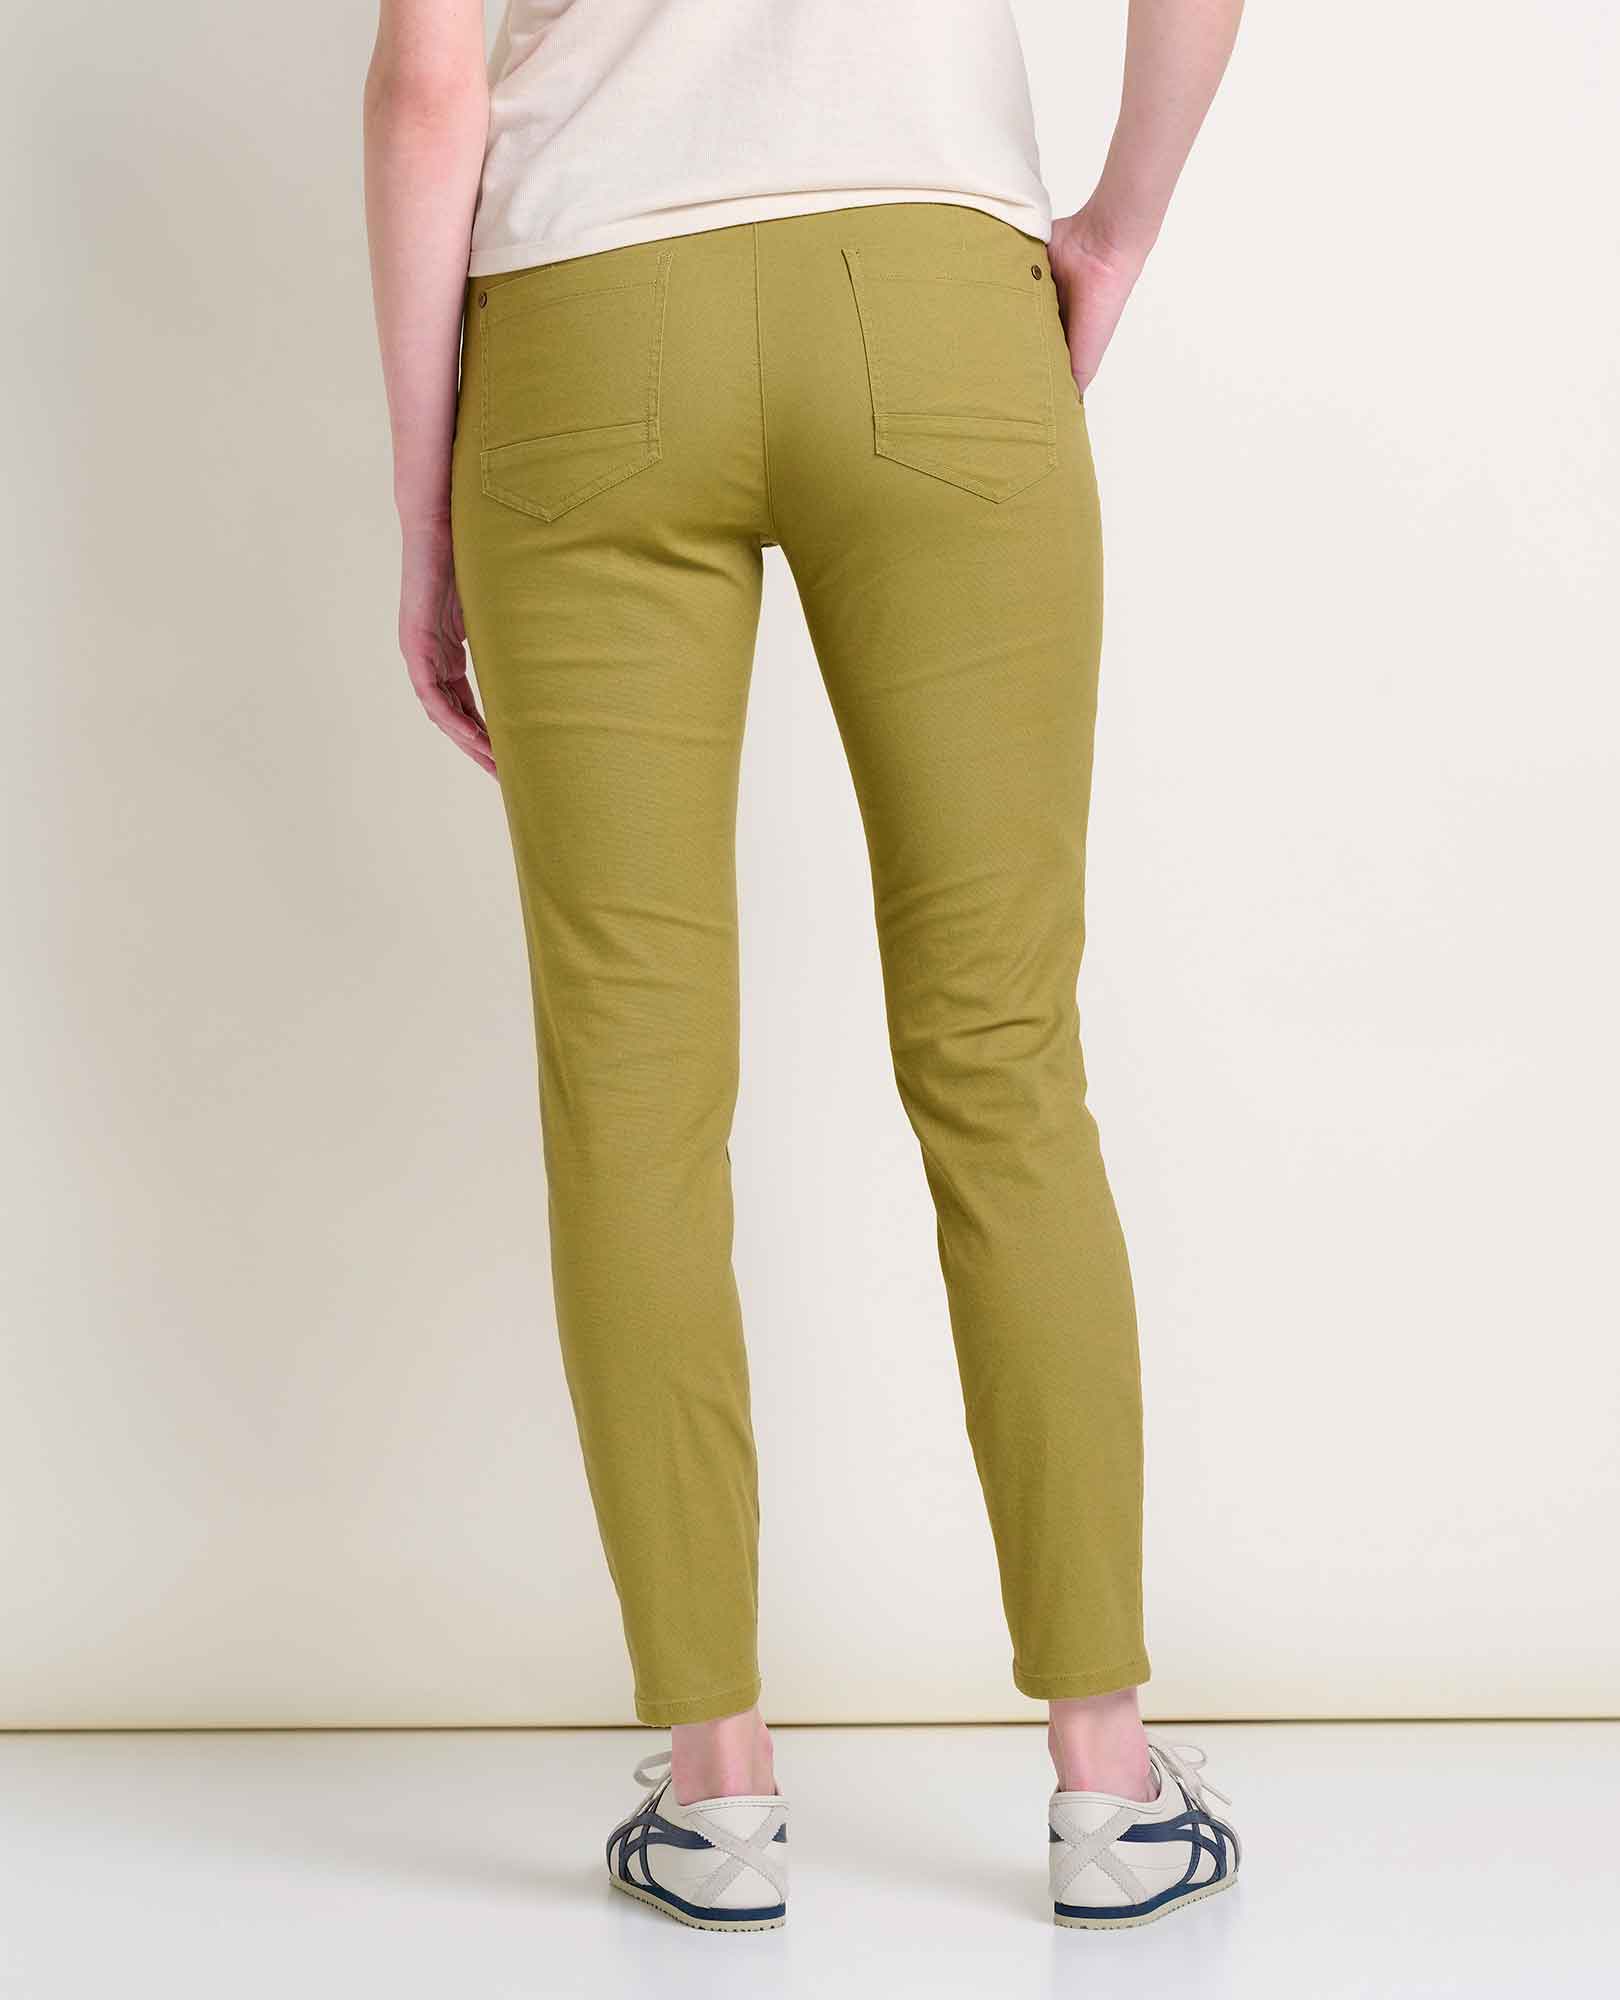 Ankle Pant for Ladies..